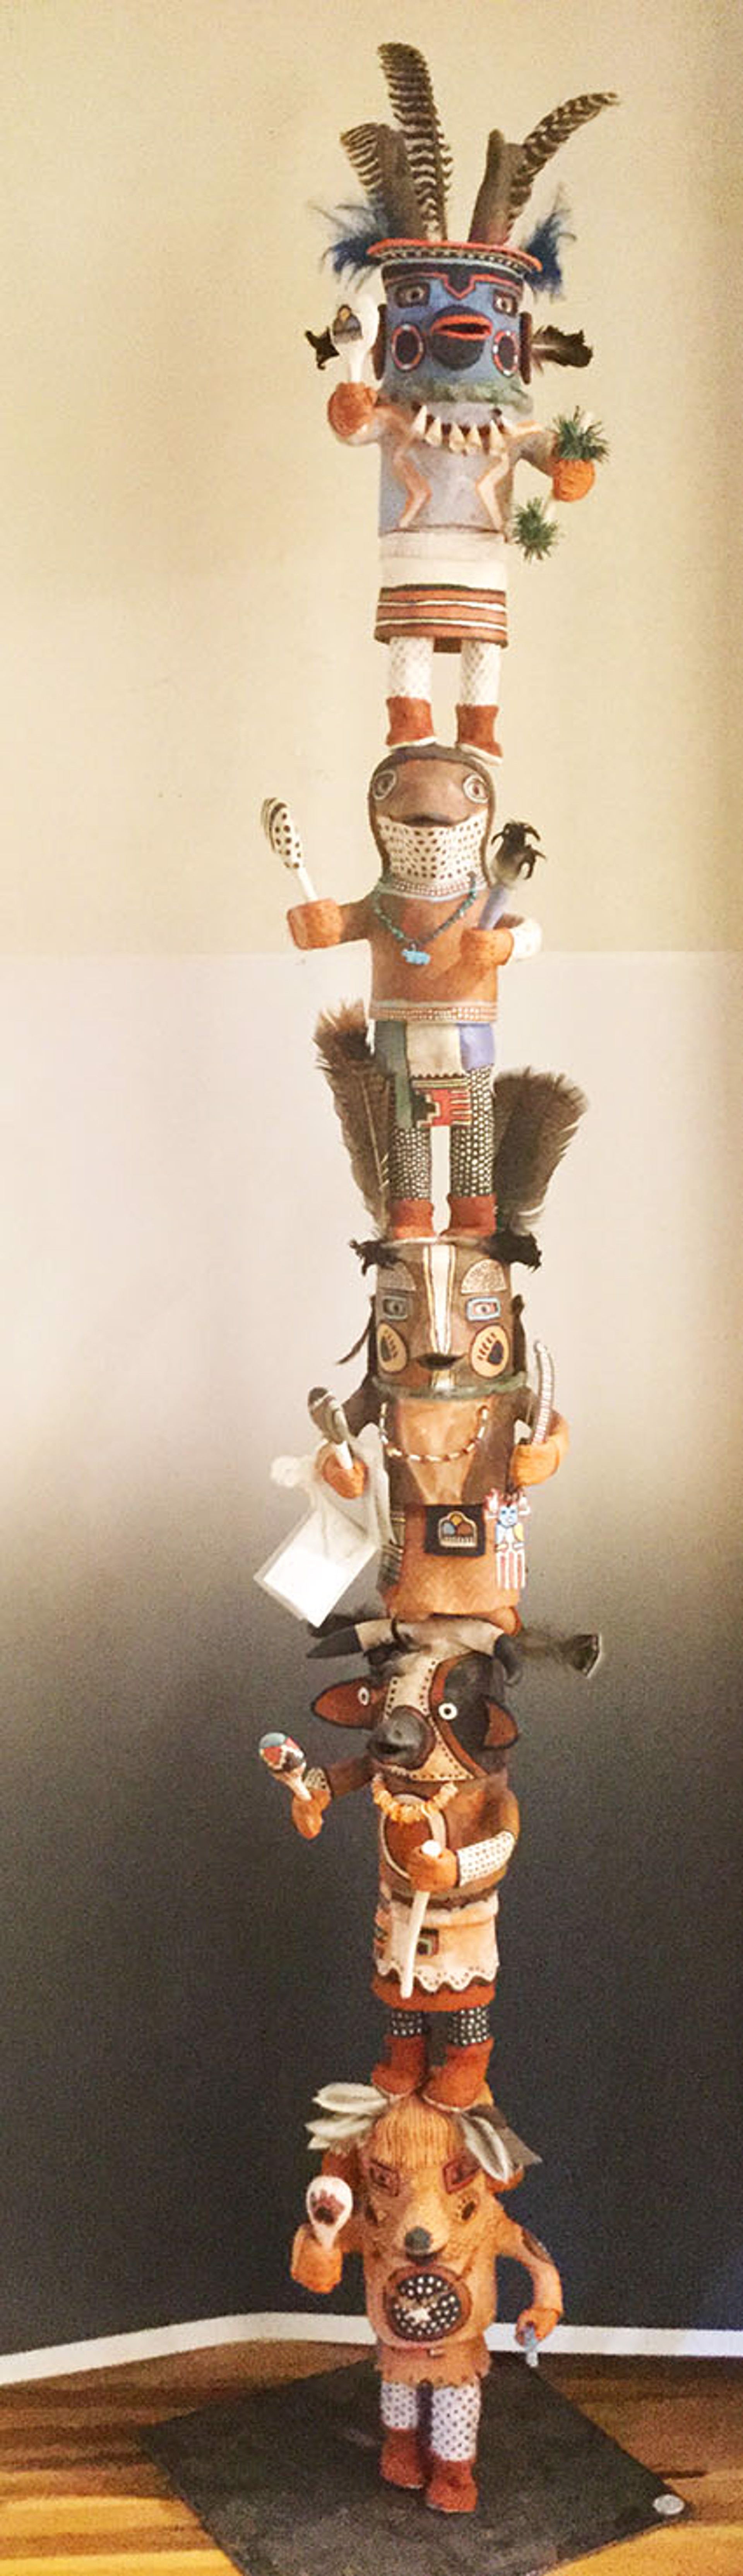 T307 Animal Kachinas by Molly Heizer